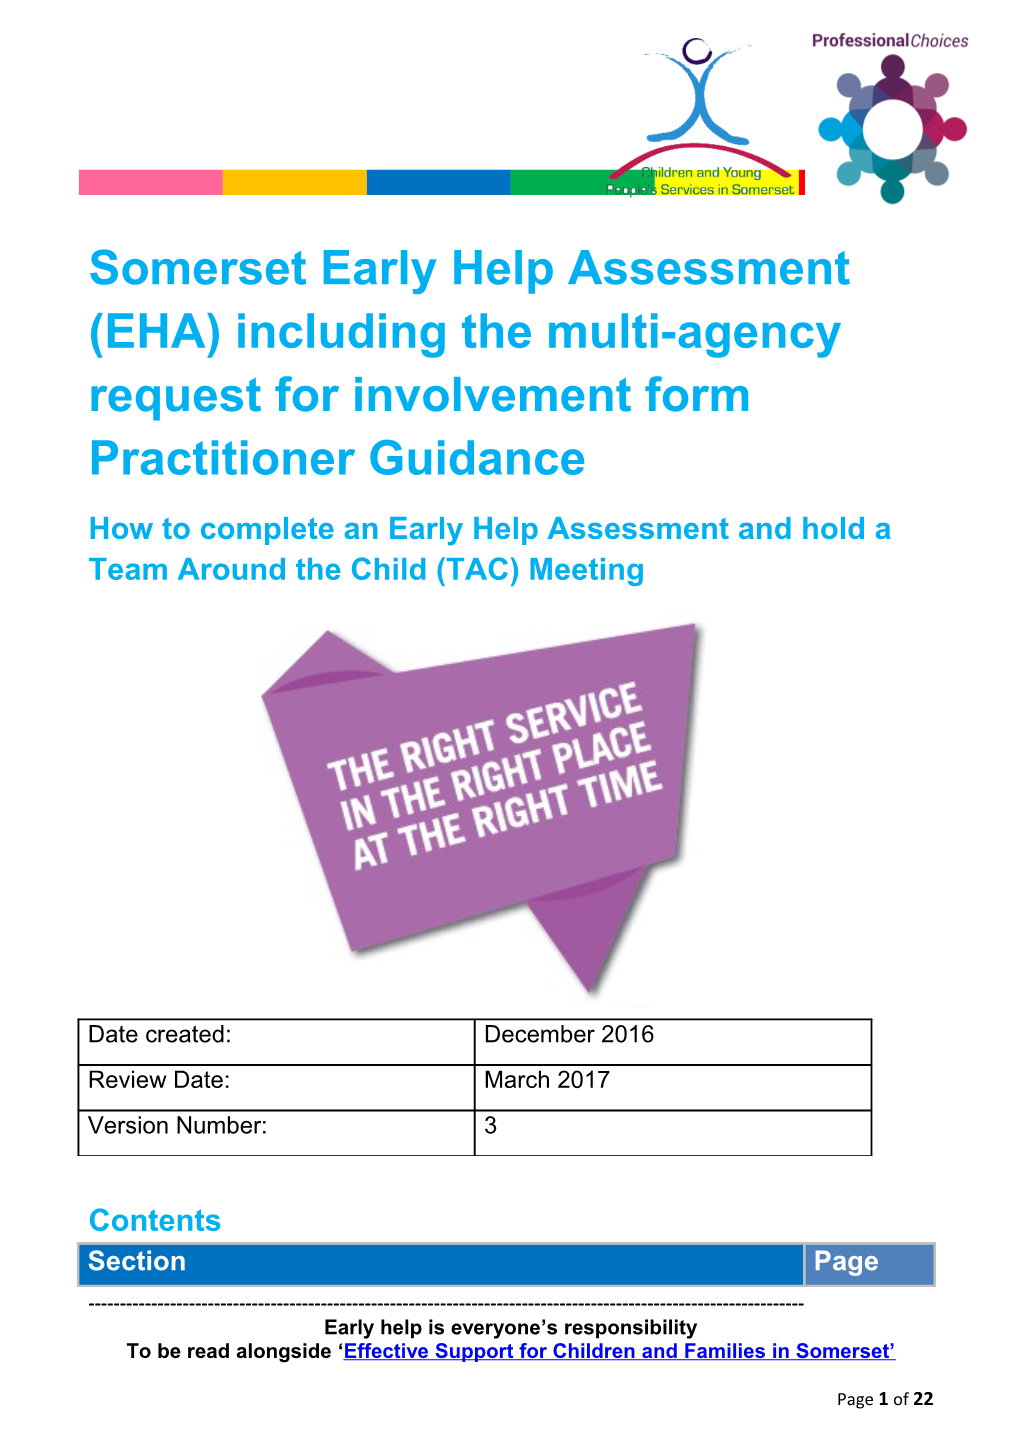 How to Complete an Early Help Assessment and Hold a Team Around the Child (TAC) Meeting